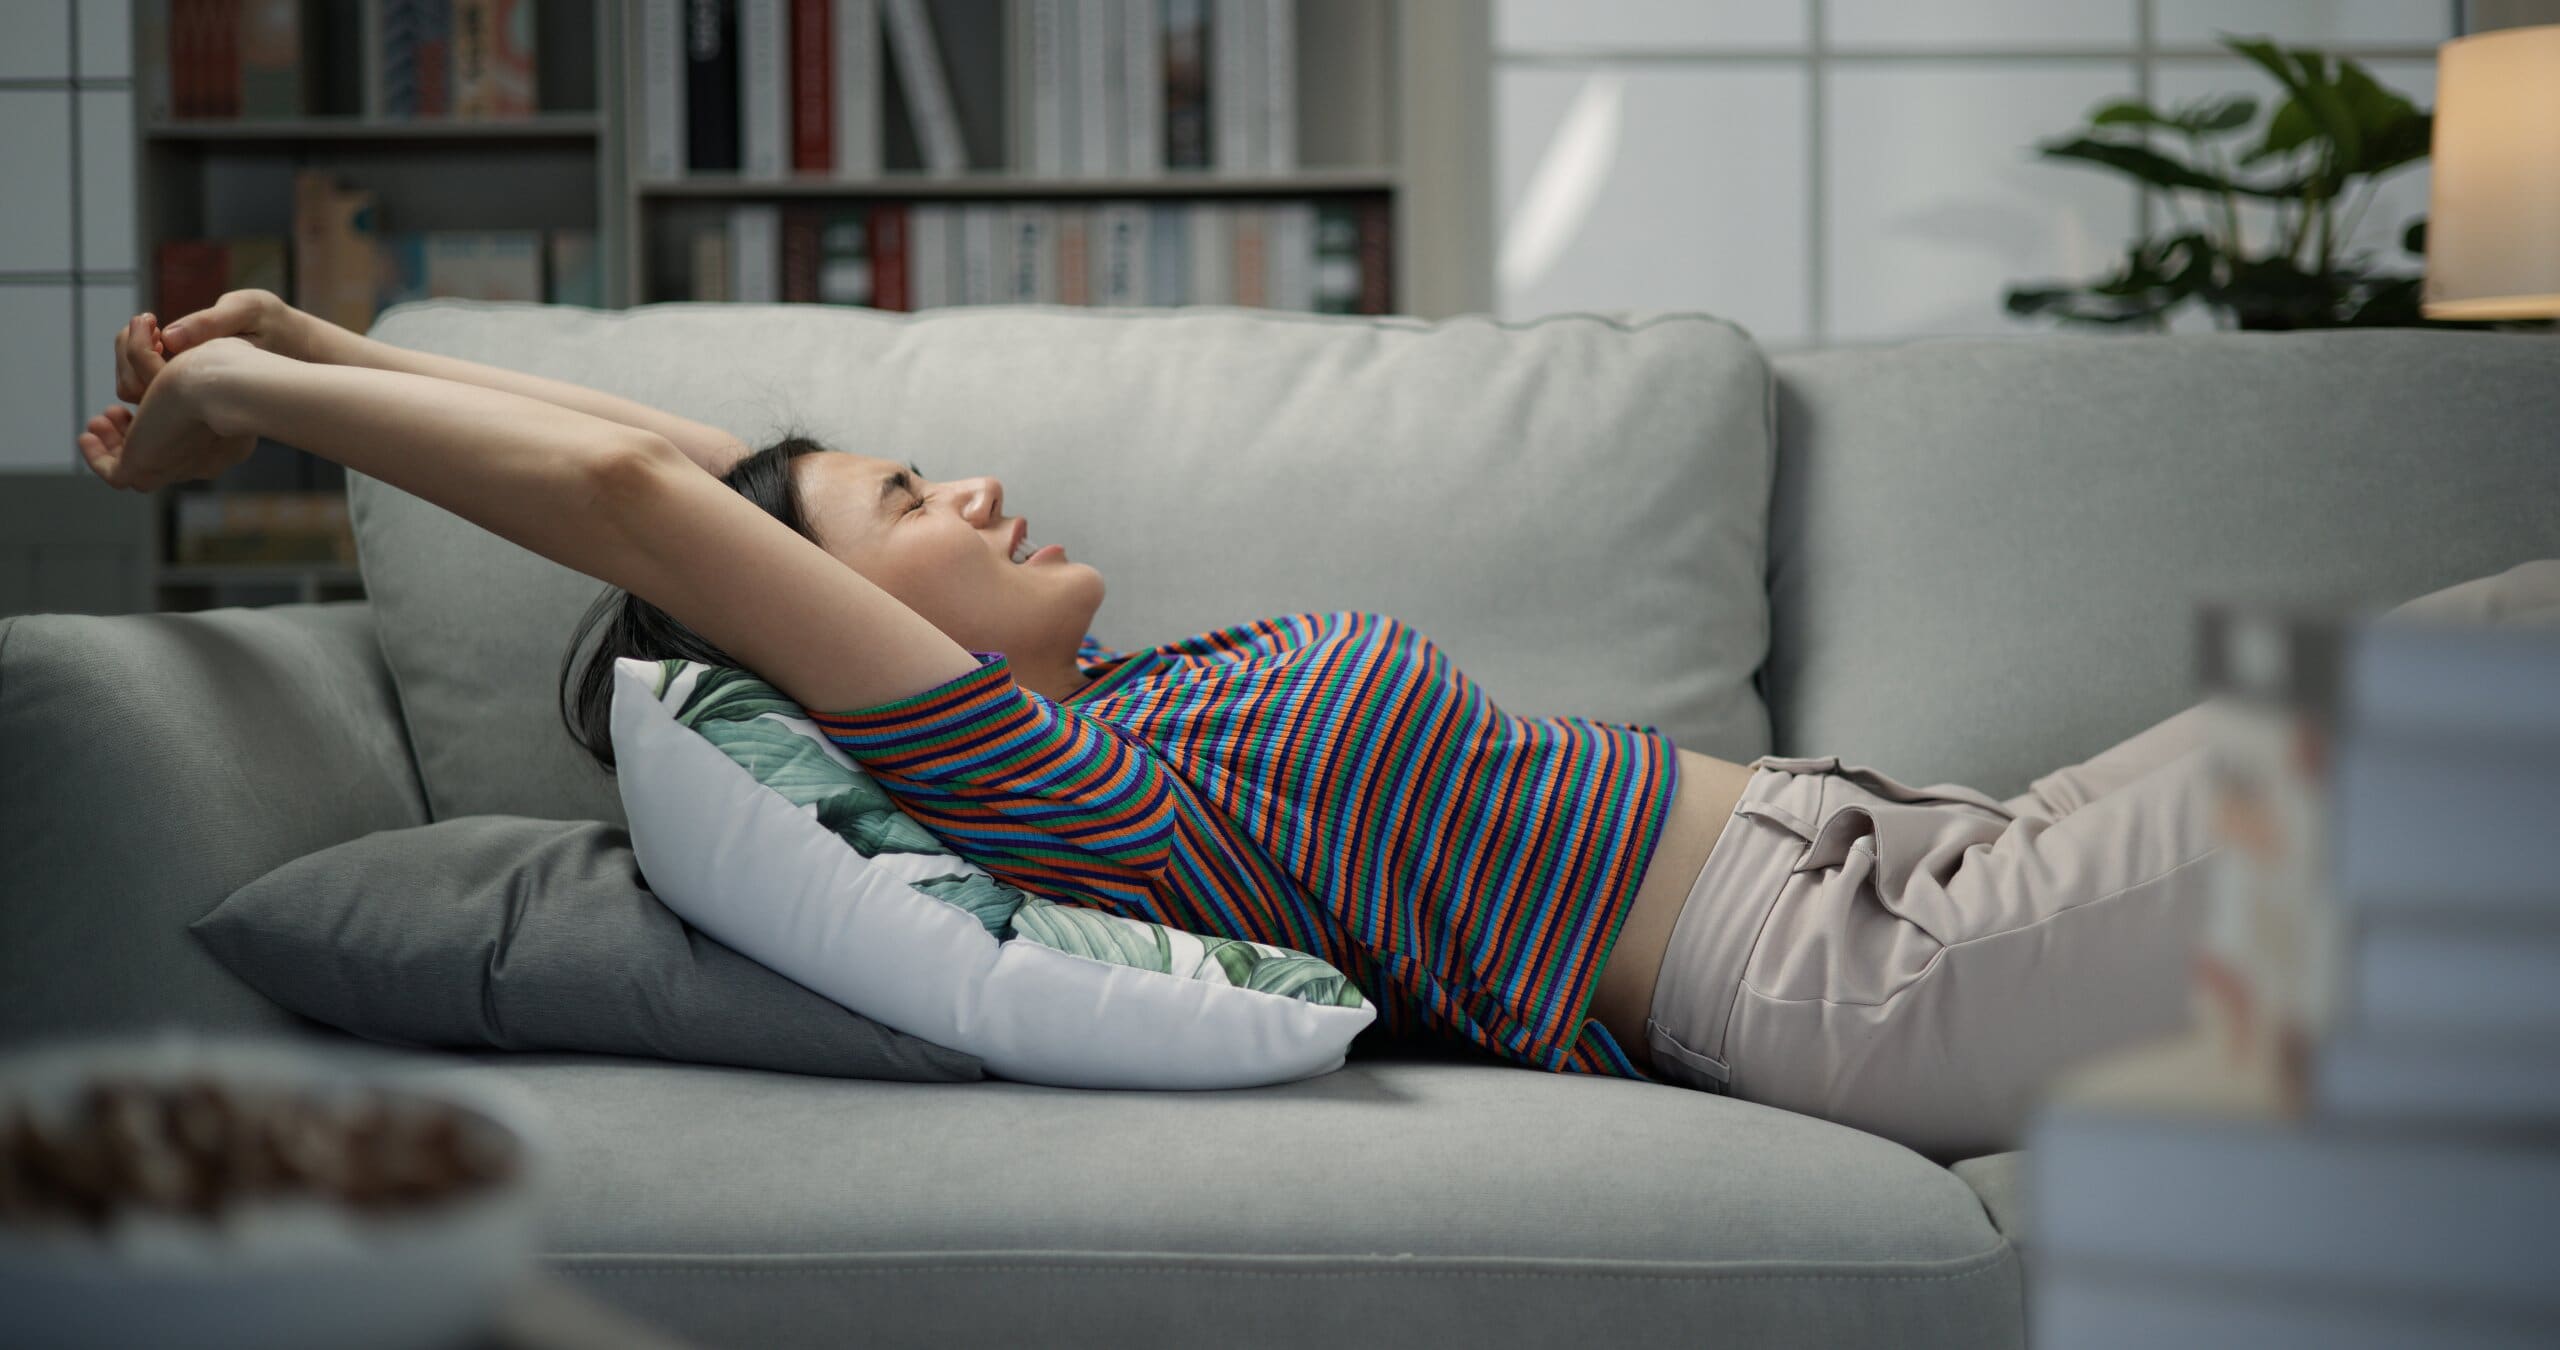 Woman layed stretching out on a sofa with pillows under her.